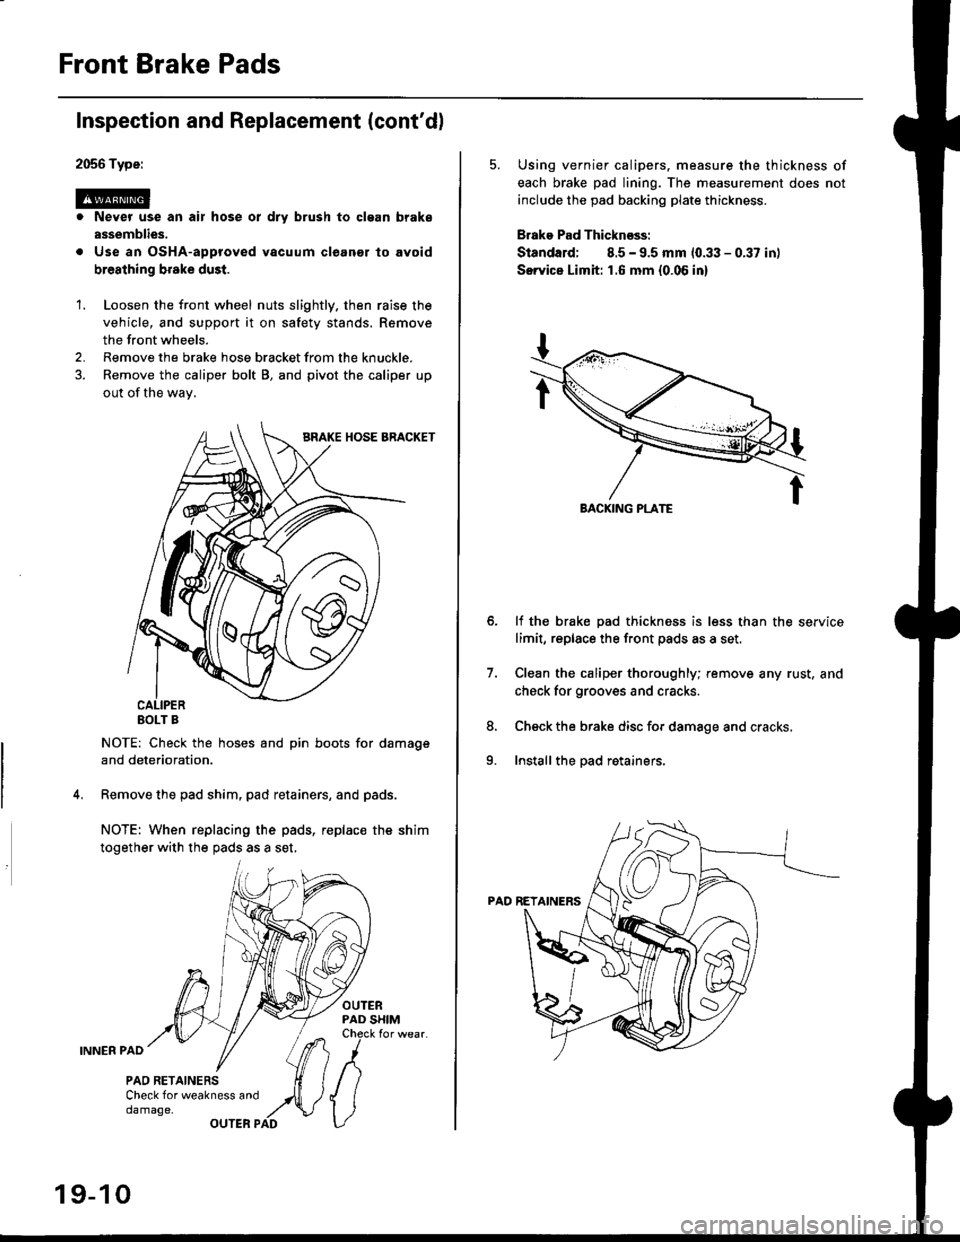 HONDA CIVIC 1999 6.G Workshop Manual Front Brake Pads
2056 Type:
@. Never use an air hose or dry brush to clgan brake
assemblies.
. Use an OsHA-approved vacuum cleanor lo avoid
breathing broke dust.
Inspection and Replacement (contdl
1.